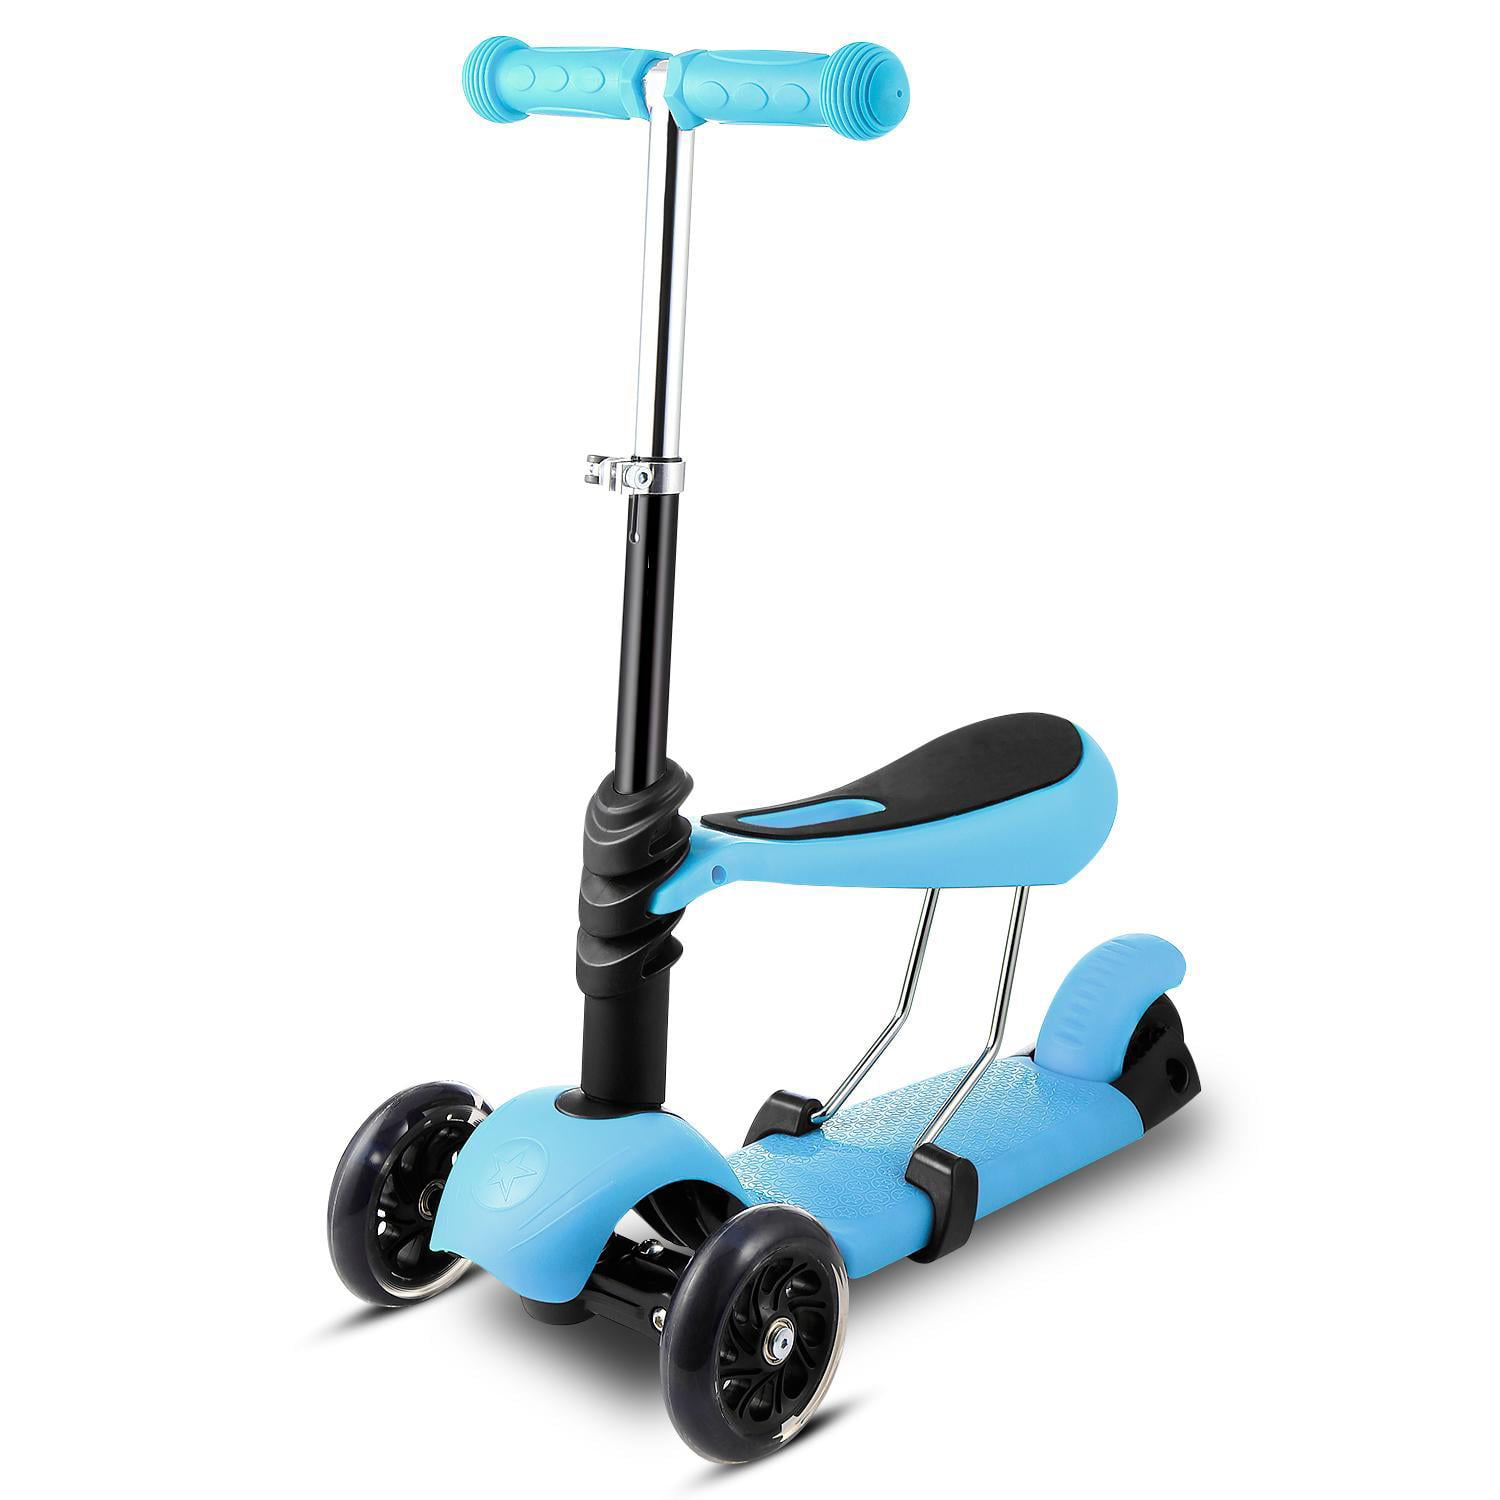 3 wheel scooter for kids